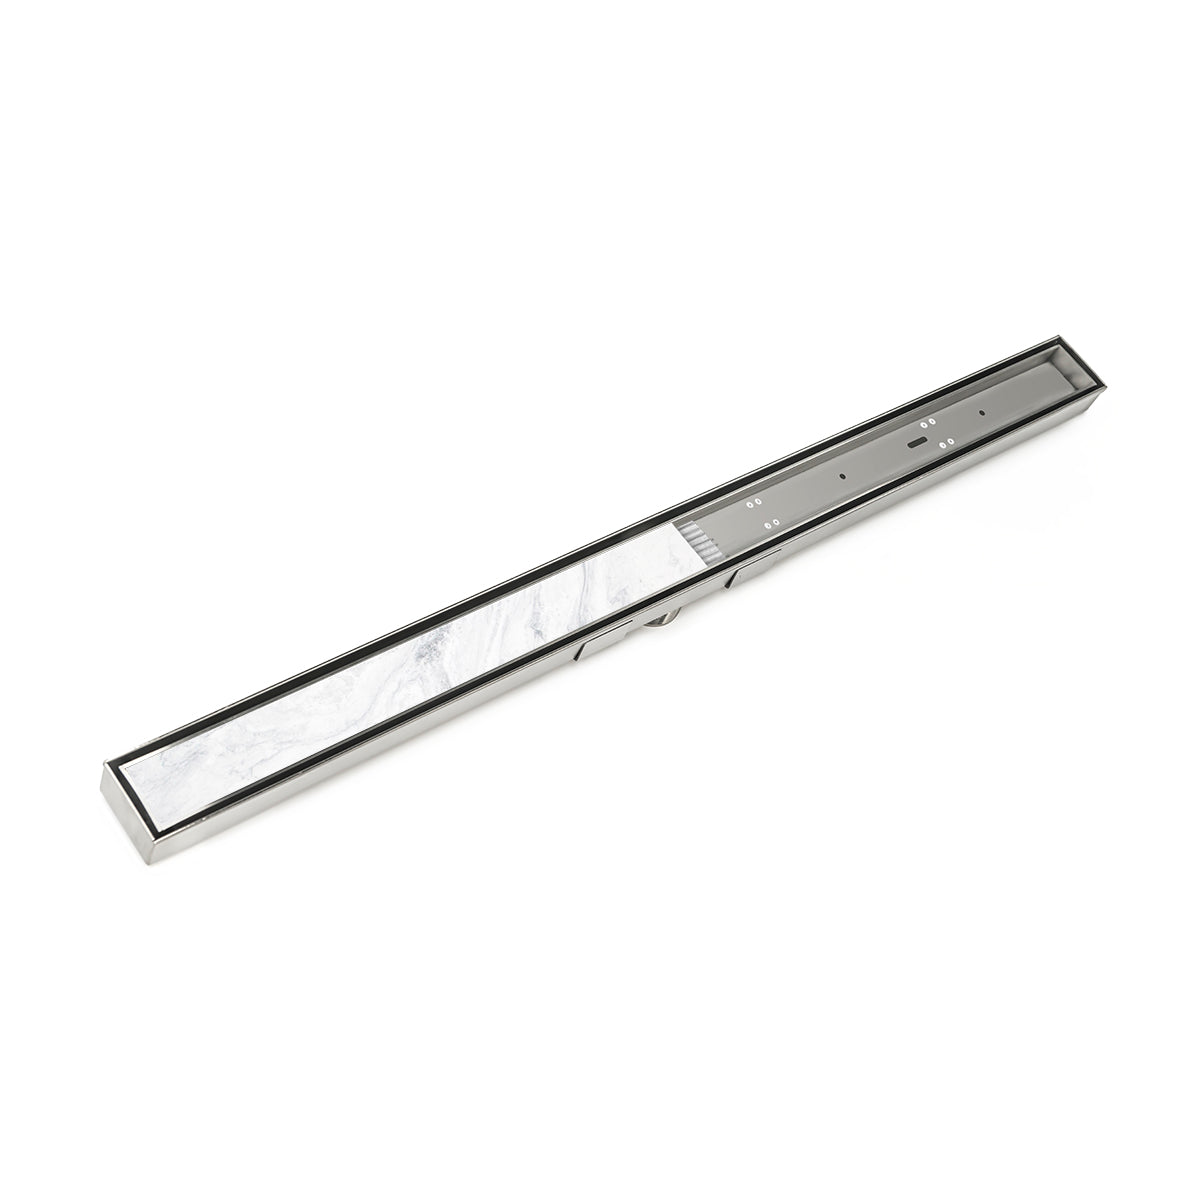 Infinity Drain 48" S-Stainless Steel Series High Flow Site Sizable Linear Drain Kit with Low Profile Tile Insert Frame with ABS Drain Body, 3" Outlet